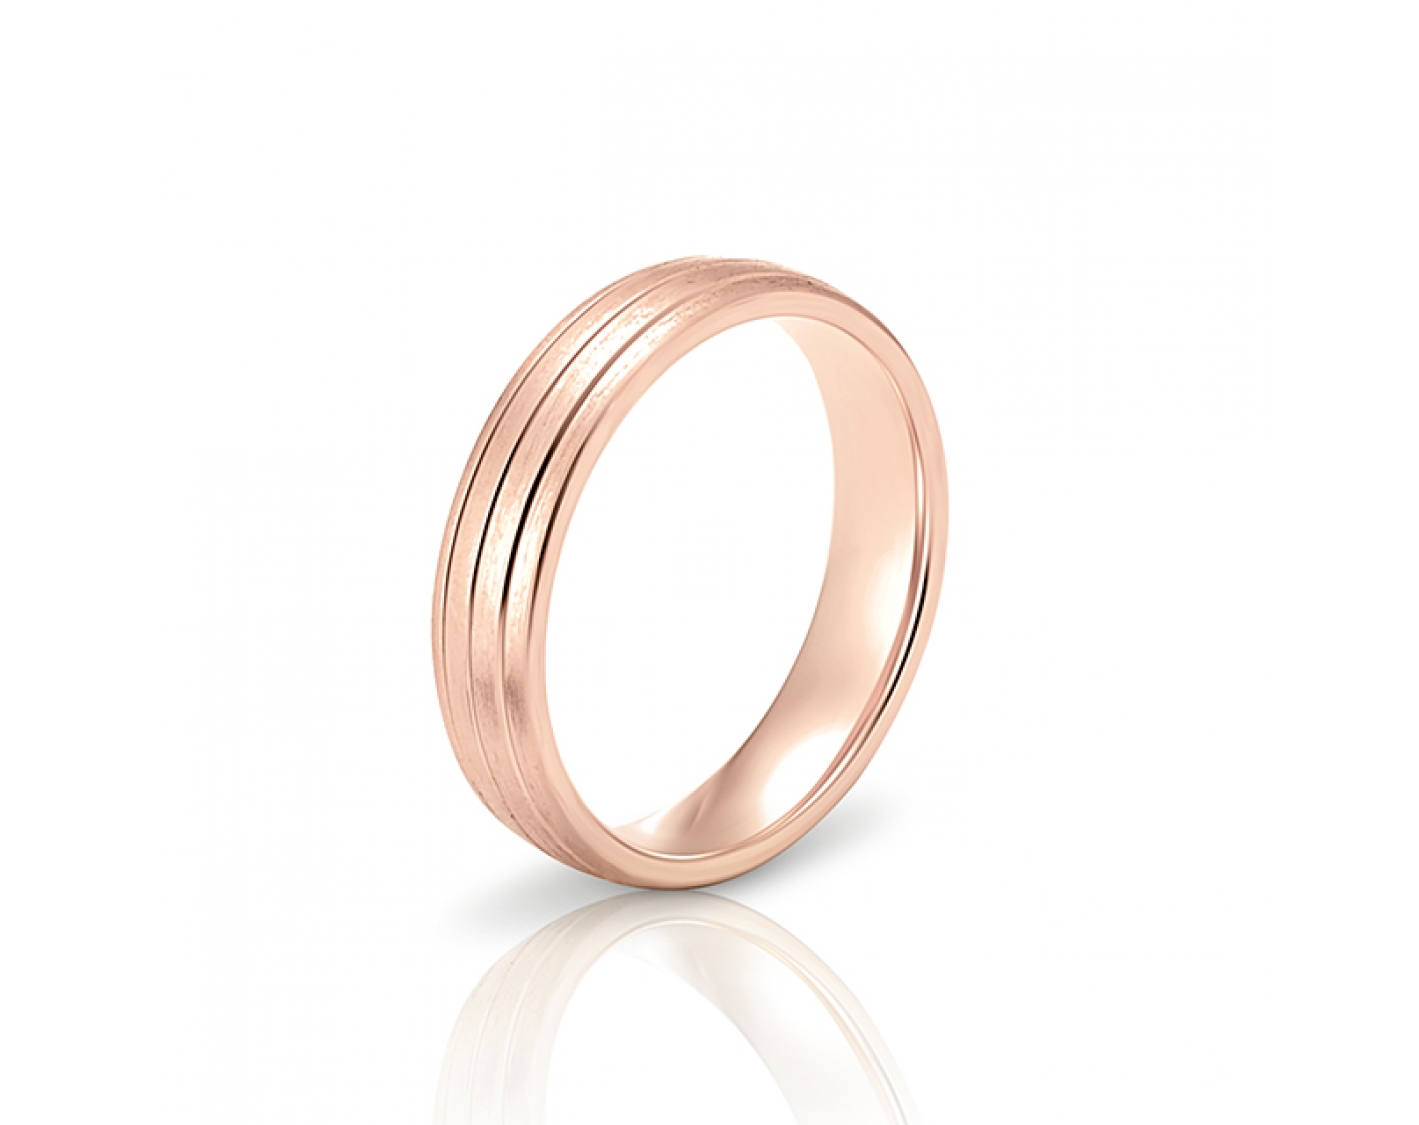 18k rose gold 5mm matte wedding band with shiny inlays